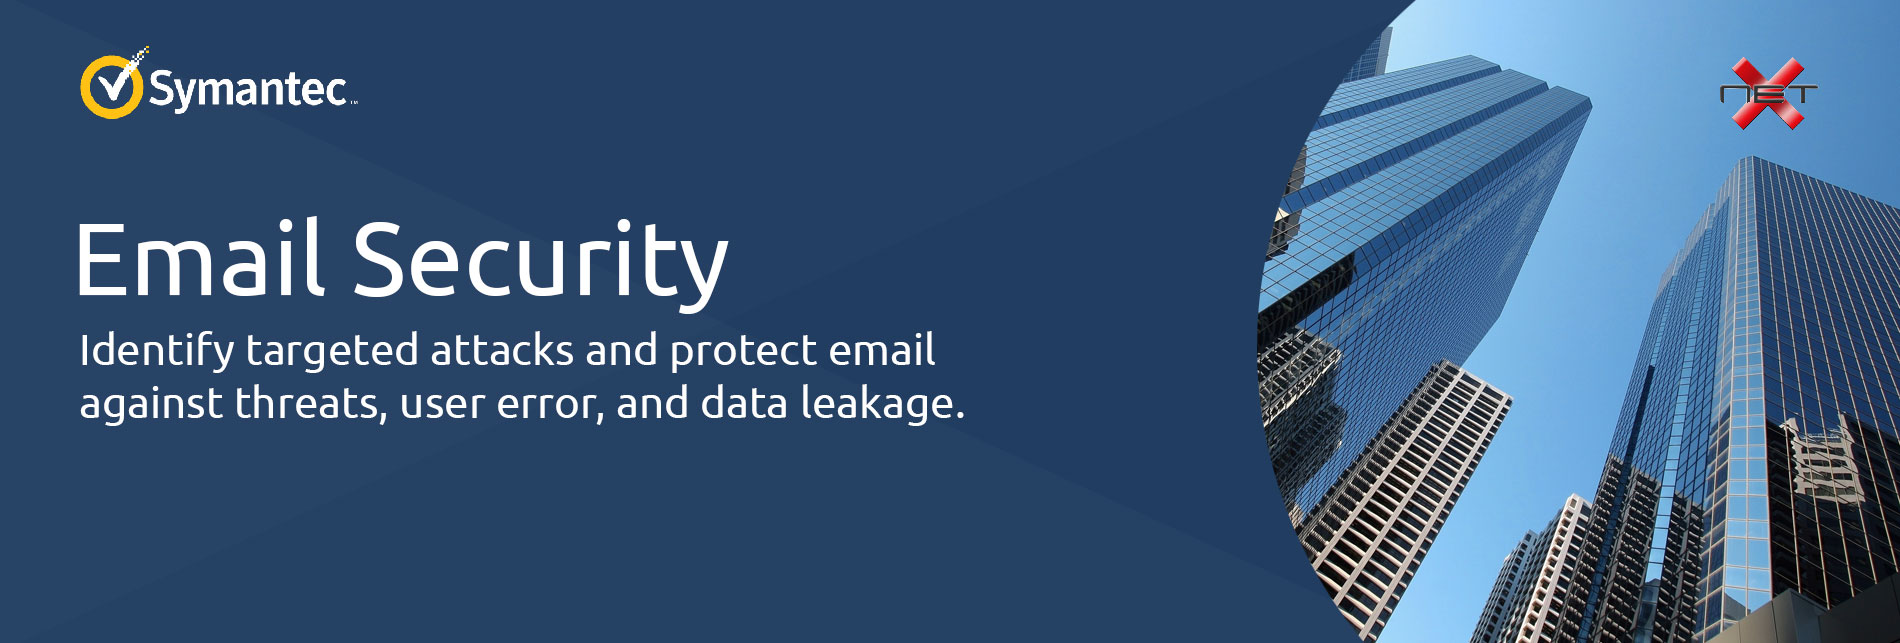 symantec-email-security-with netx banner